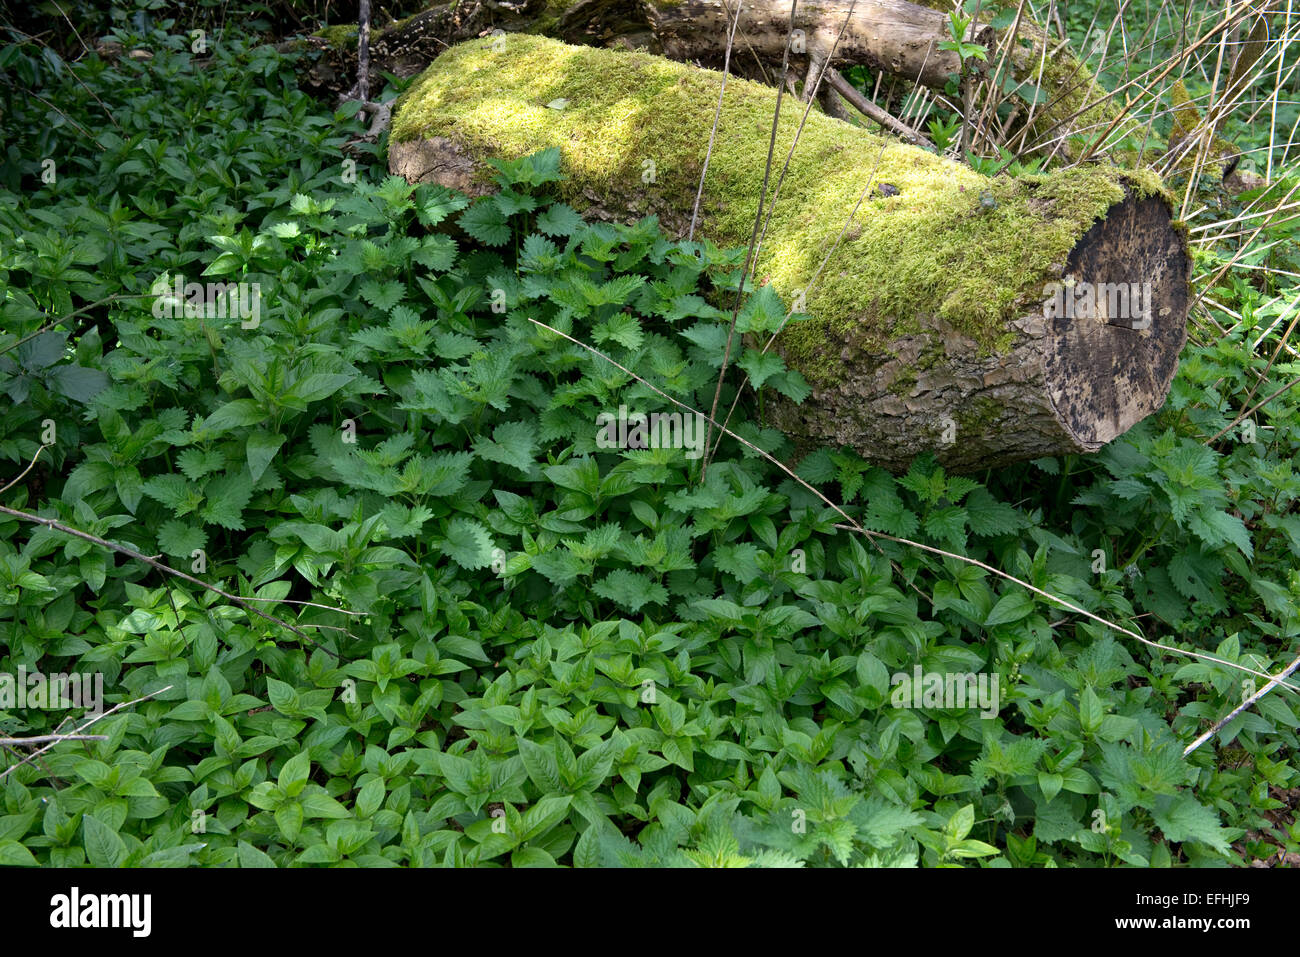 Stinging nettles, Urtica dioica, and dog's mercury, Mercurialis perennis, with old moss covered tree trunk in light woodland in Stock Photo